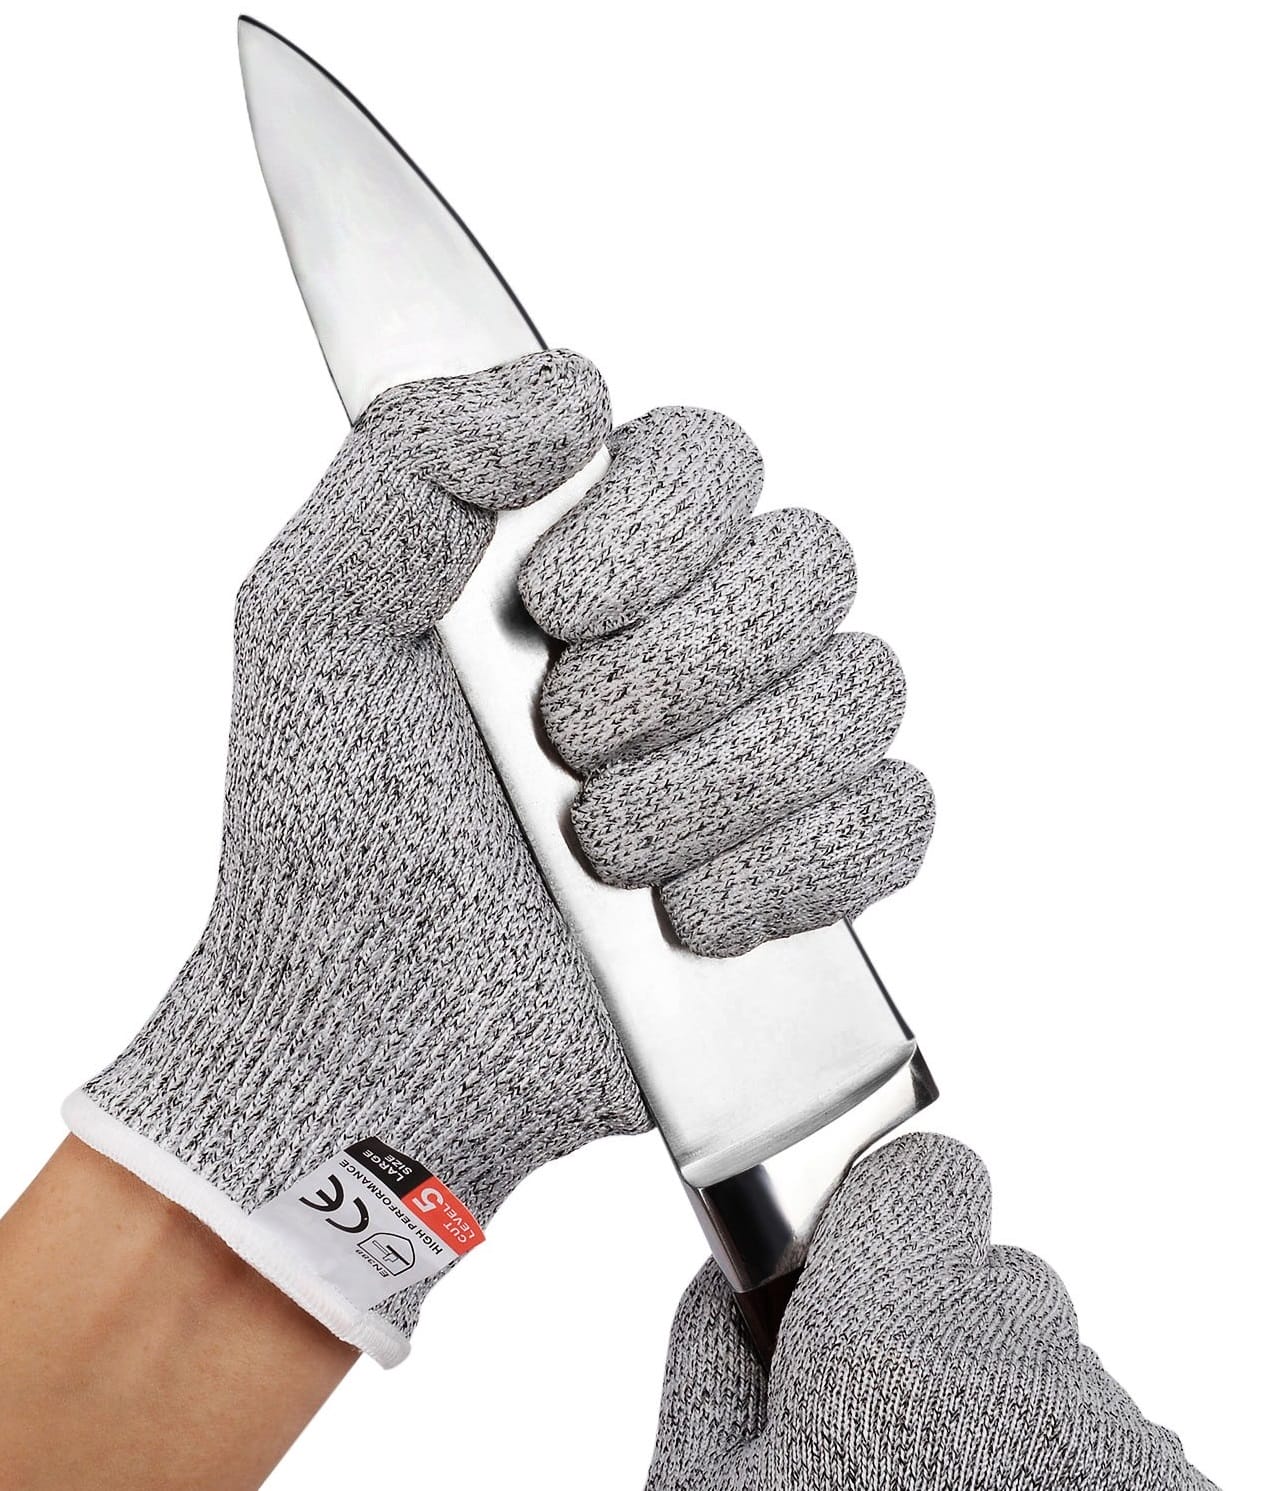 COCOCITY Cut Resistant Gloves